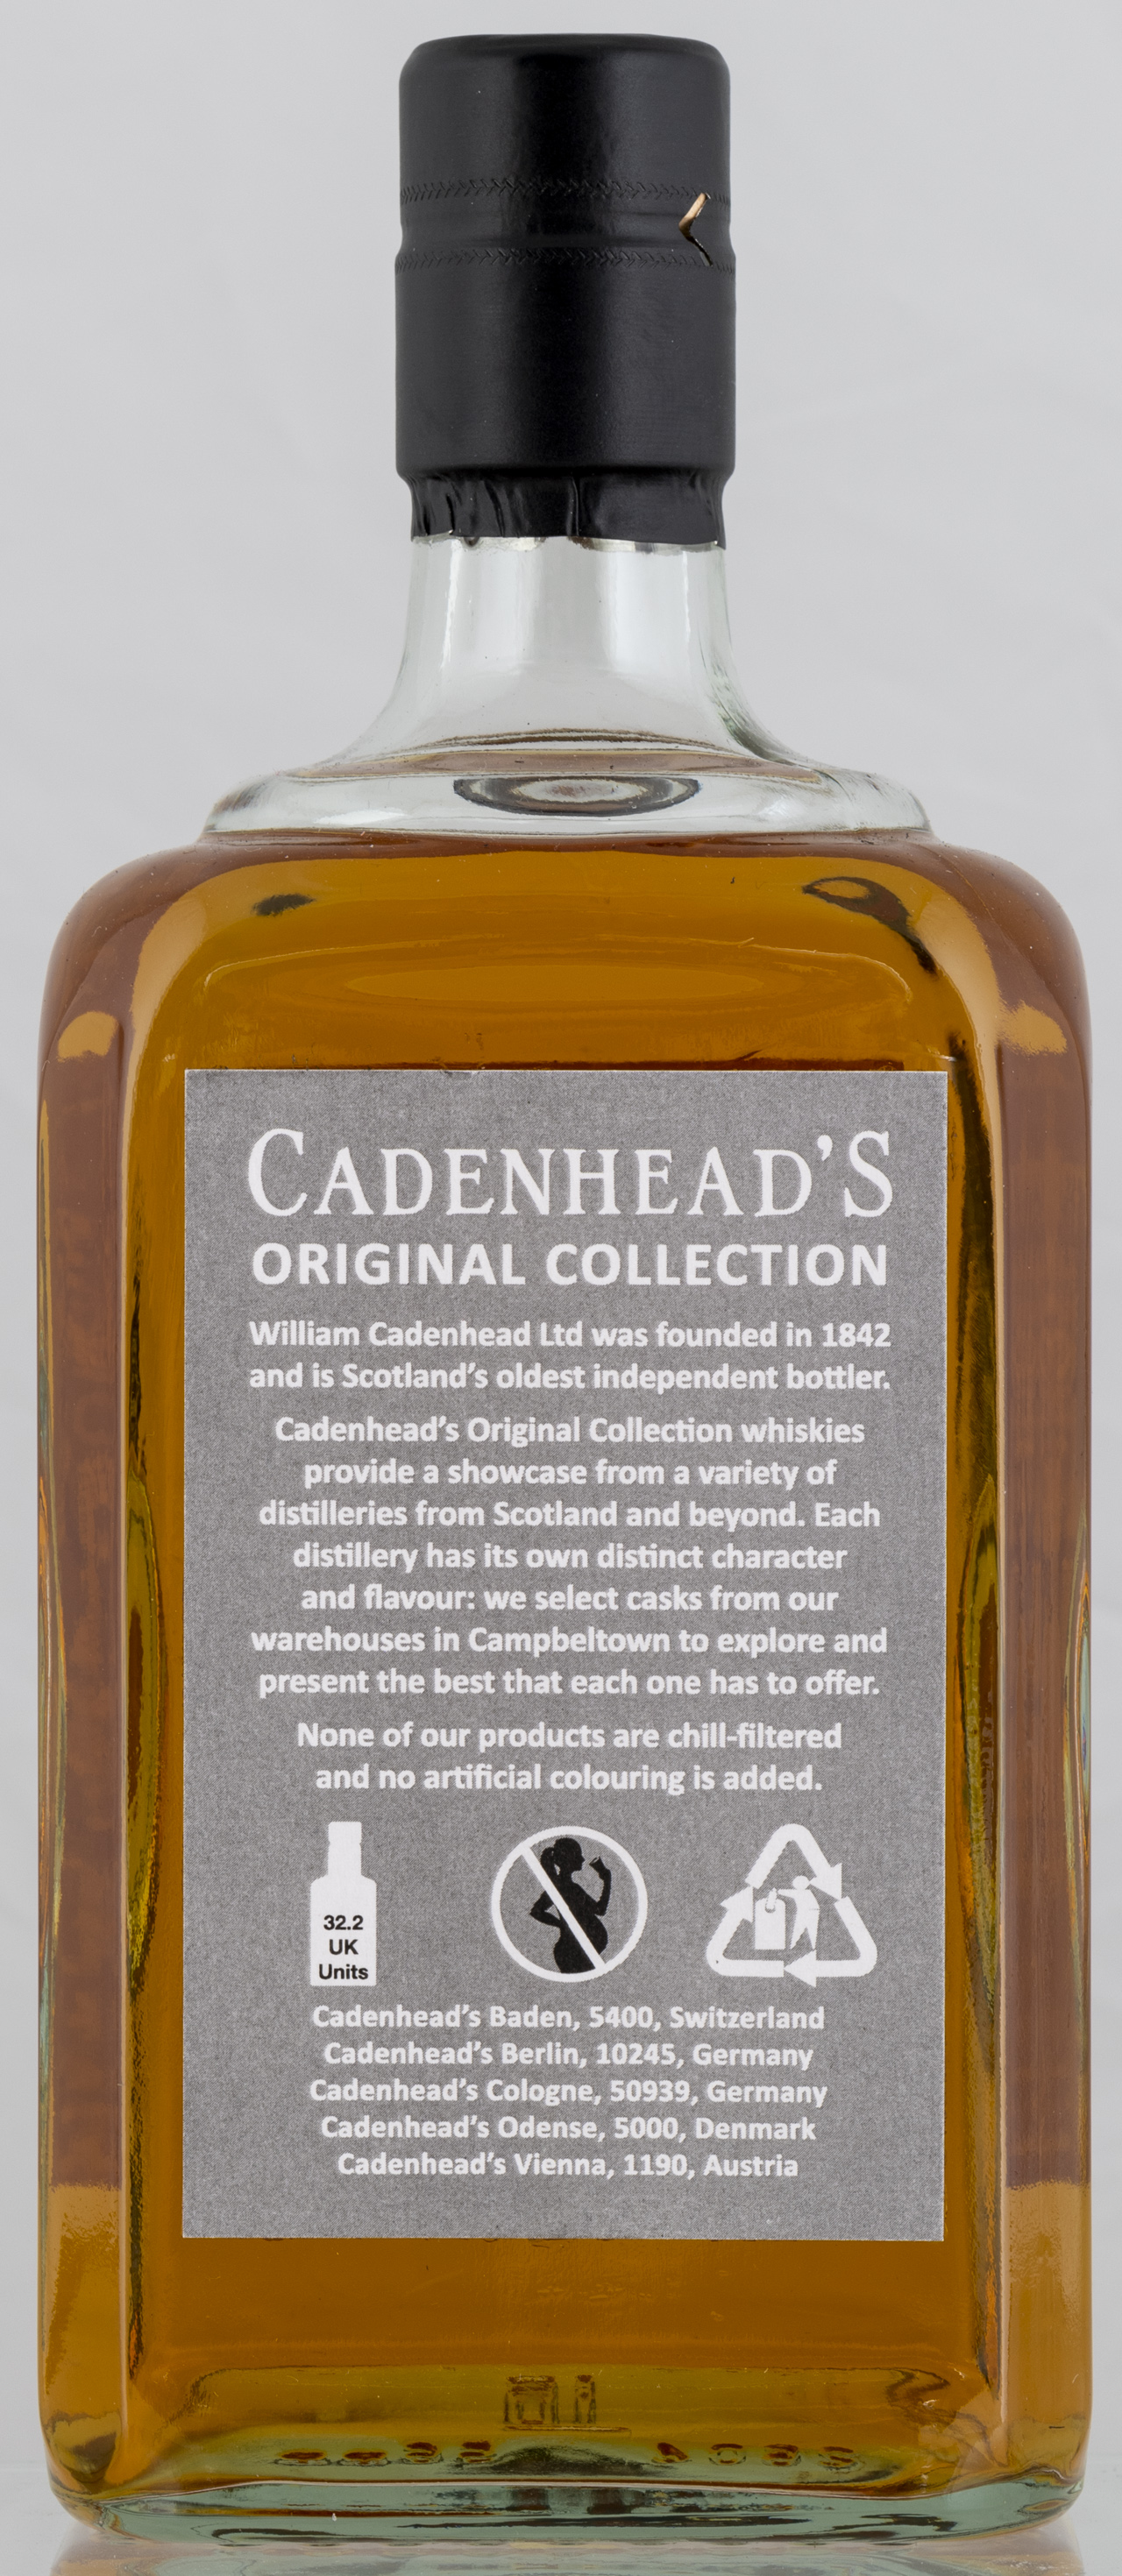 Billede: PHC_7271 - Cadenheads Original Collection The English Whisky Company 12 - bottle back.jpg